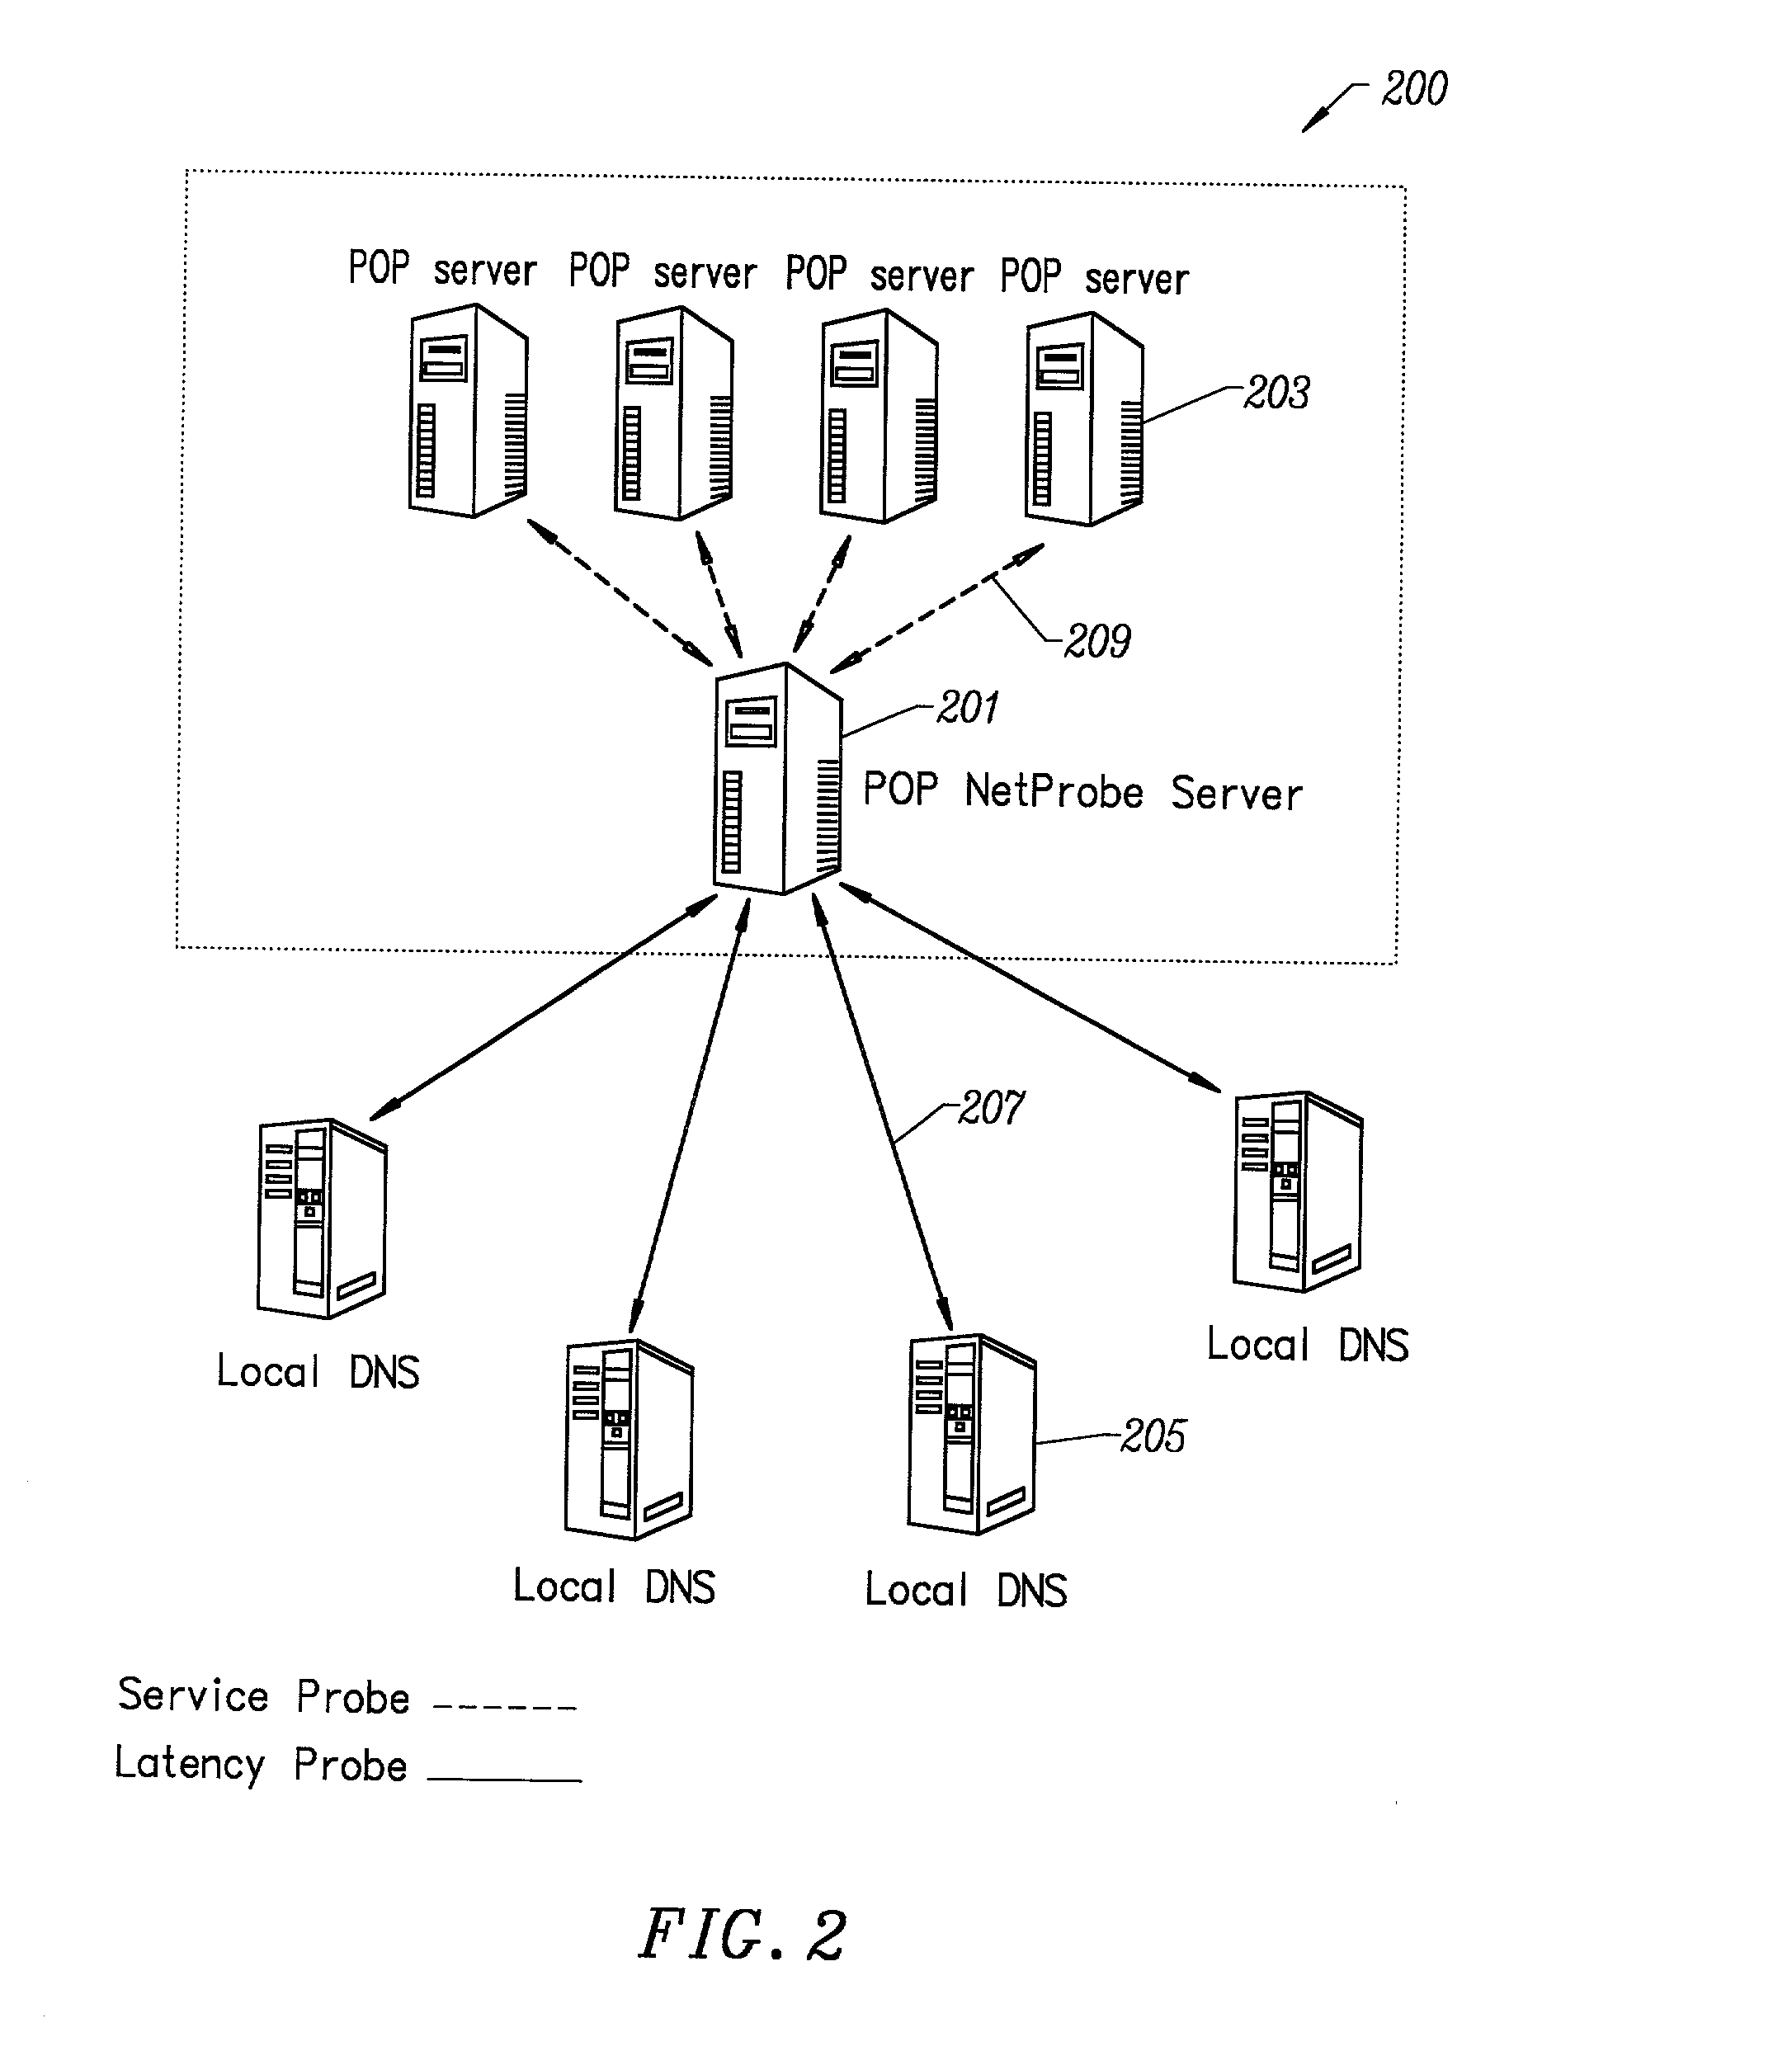 Method for determining metrics of a content delivery and global traffic management network